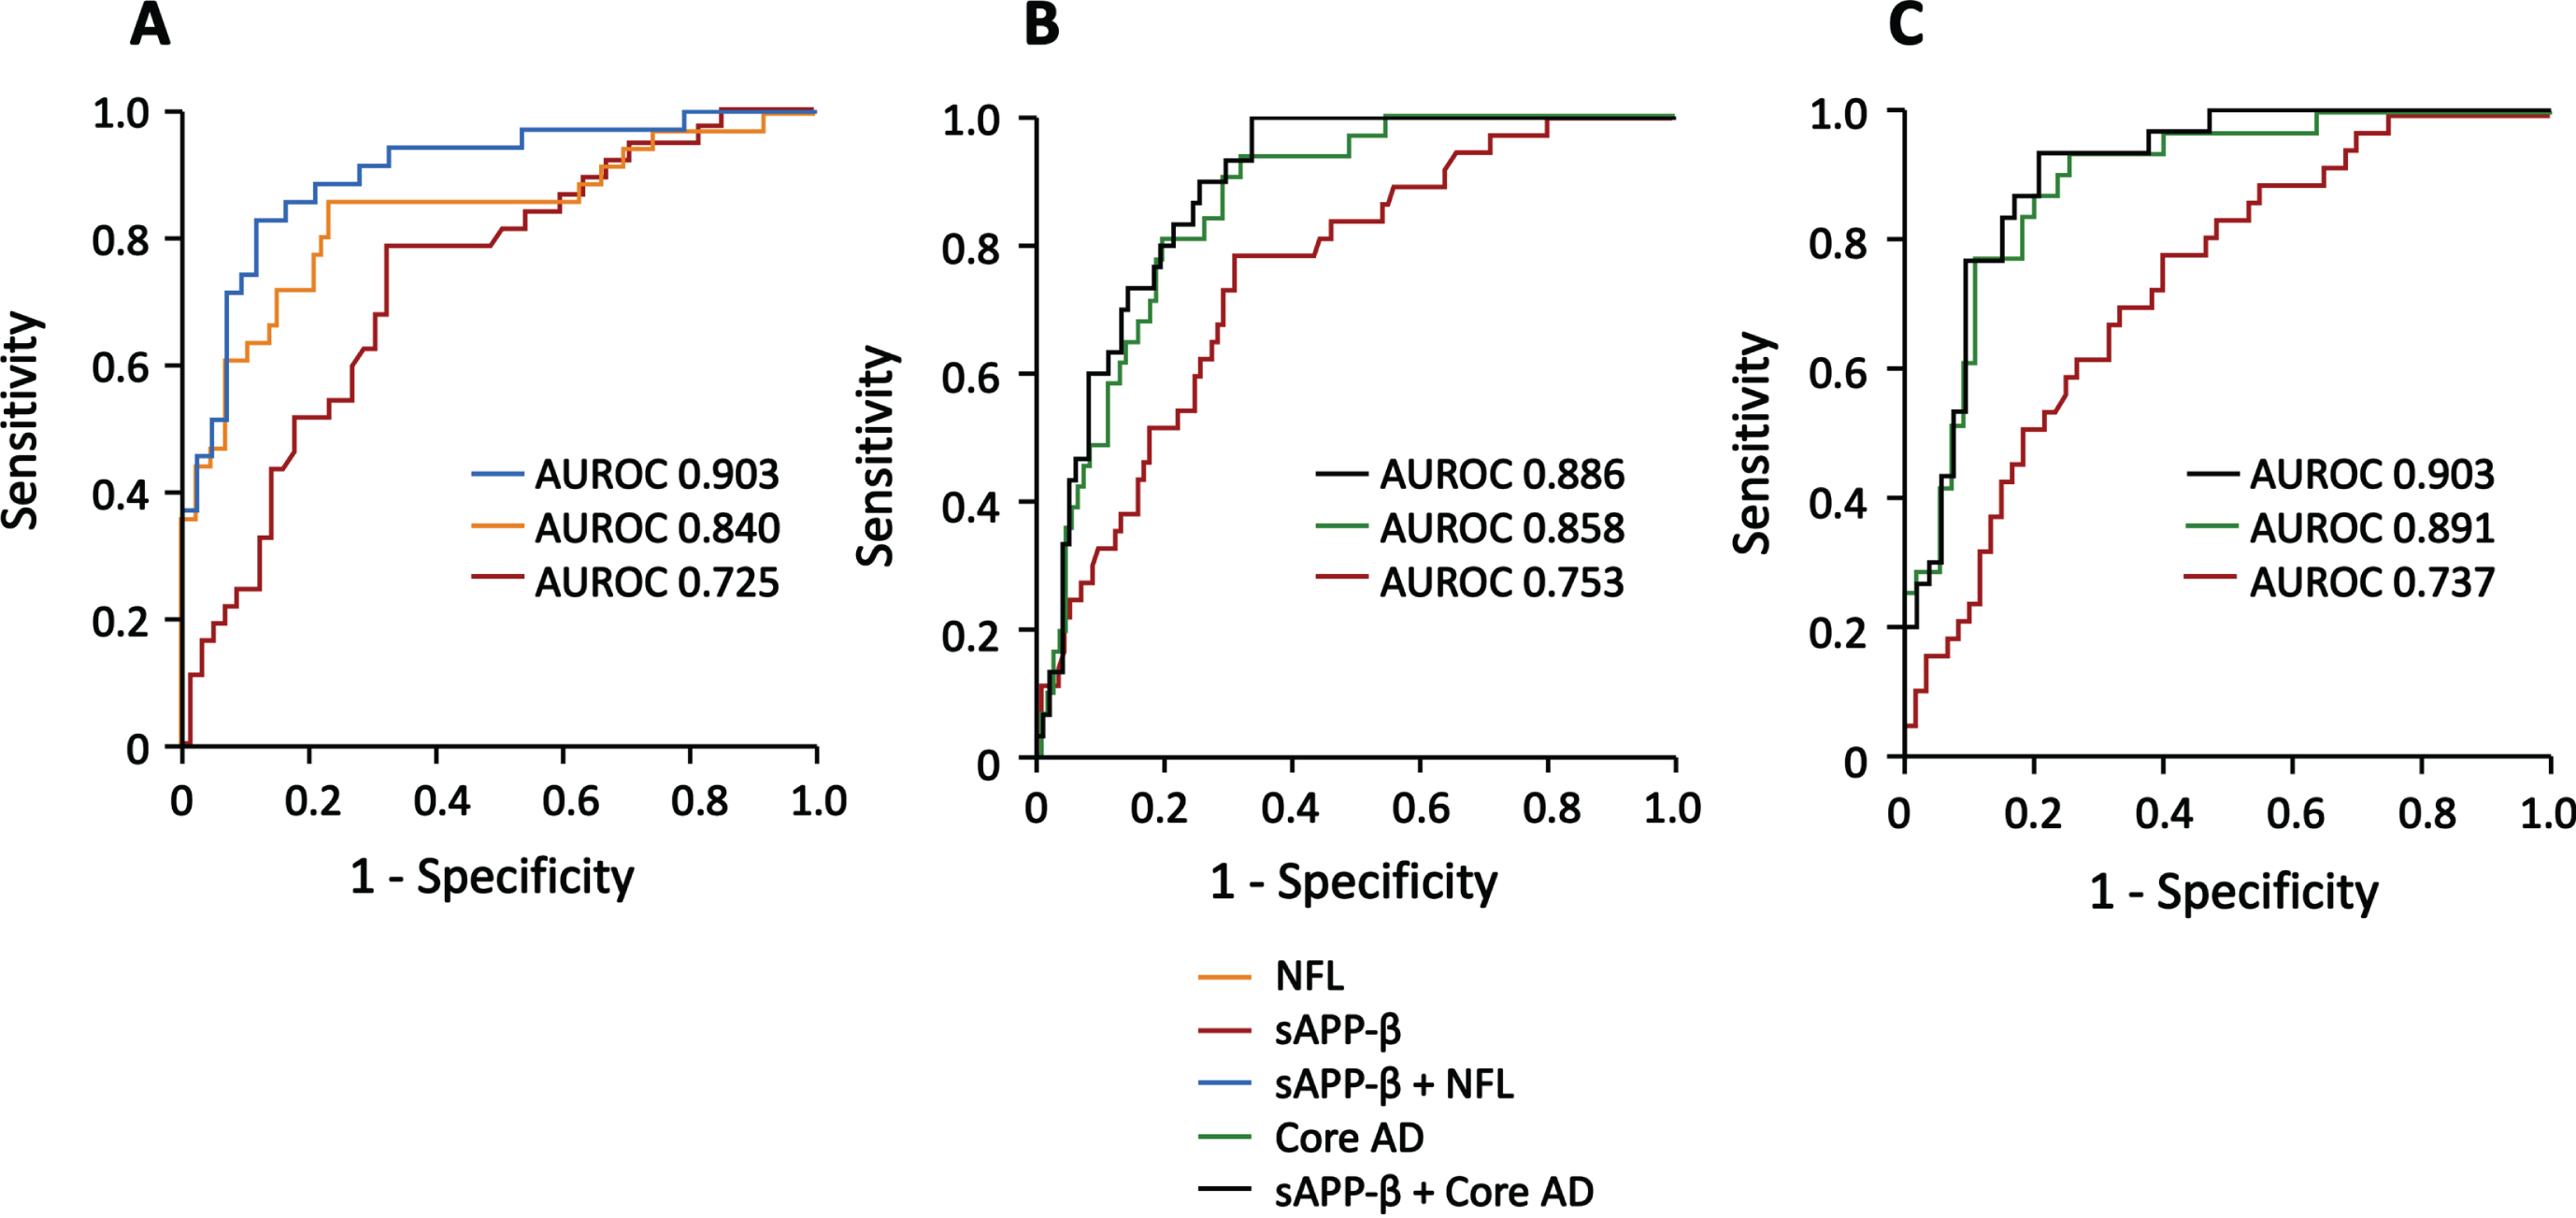 SSVD can be separated from AD, mixed dementia, and healthy controls using CSF biomarkers. The results of ROC statistics are presented. A) The separation of SSVD from healthy controls by NFL (AUROC 0.840, 95% CI: 0.754–0.926, p < 0.001), sAβPPβ (AUROC 0.725, 95% CI: 0.620–0.829, p < 0.001), and the combined use of NFL and sAβPPβ (AUROC 0.903, 95% CI: 0.834–0.972, p < 0.001). B) The separation of SSVD from AD by sAβPPβ (AUROC 0.753, 95% CI: 0.668–0.838, p < 0.001), the combined use of the core AD biomarkers Aβ42, t-tau and p-tau181 (AUROC 0.858, 95% CI: 0.794–0.923, p < 0.001), and the combined use of sAβPPβ and the core AD biomarkers (AUROC 0.886, 95% CI 0.830–0.942, p < 0.001). C) The separation of SSVD from mixed dementia by sAβPPβ (AUROC 0.737, 95% CI: 0.638–0.835, p < 0.001), the core AD biomarkers (AUROC 0.891, 95% CI: 0.823–0.960, p < 0.001), and the combined use of sAβPPβ and the core AD biomarkers (AUROC 0.903, 95% CI 0.838–0.968, p < 0.001). In the panels, orange represents NFL; red, sAβPPβ; blue, sAβPPβ combined with NFL; green, the core AD biomarkers; black, sAβPPβ combined with the core AD biomarkers. SSVD, subcortical small vessel disease; AD, Alzheimer’s disease; CSF, cerebrospinal fluid; ROC, receiver operating characteristics; AUROC, area under the receiver operating characteristics; NFL, neurofilament light chain; sAβPP, soluble amyloid-β protein precursor; Aβ42, amyloid-β42; t-tau, total tau; p-tau181, phosphorylated tau181.